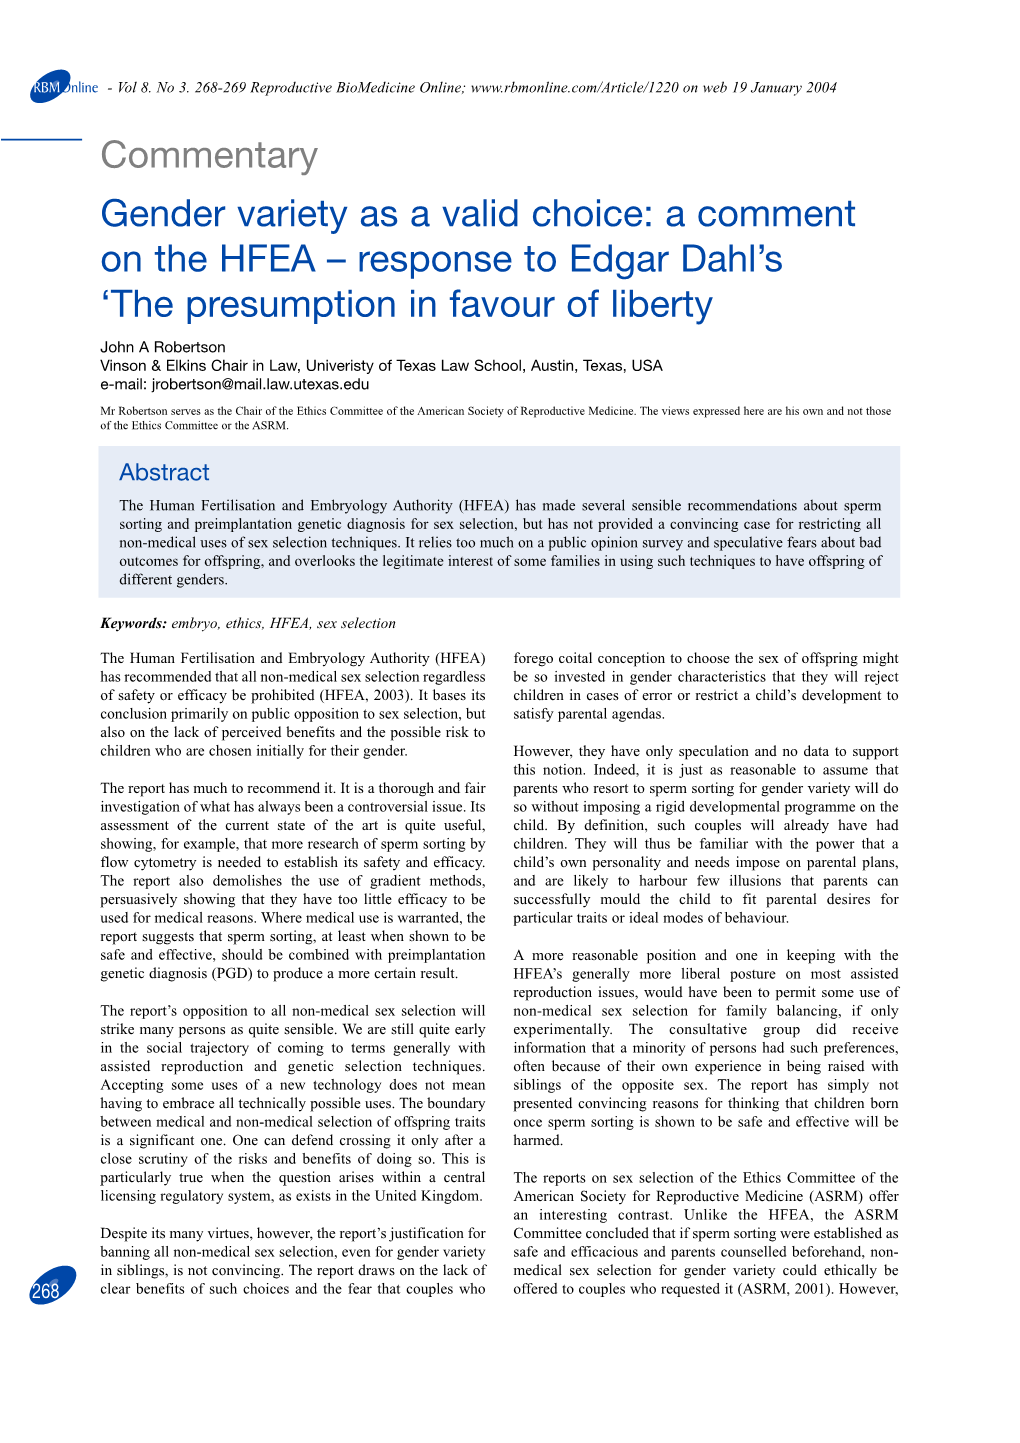 A Comment on the HFEA – Response to Edgar Dahl's